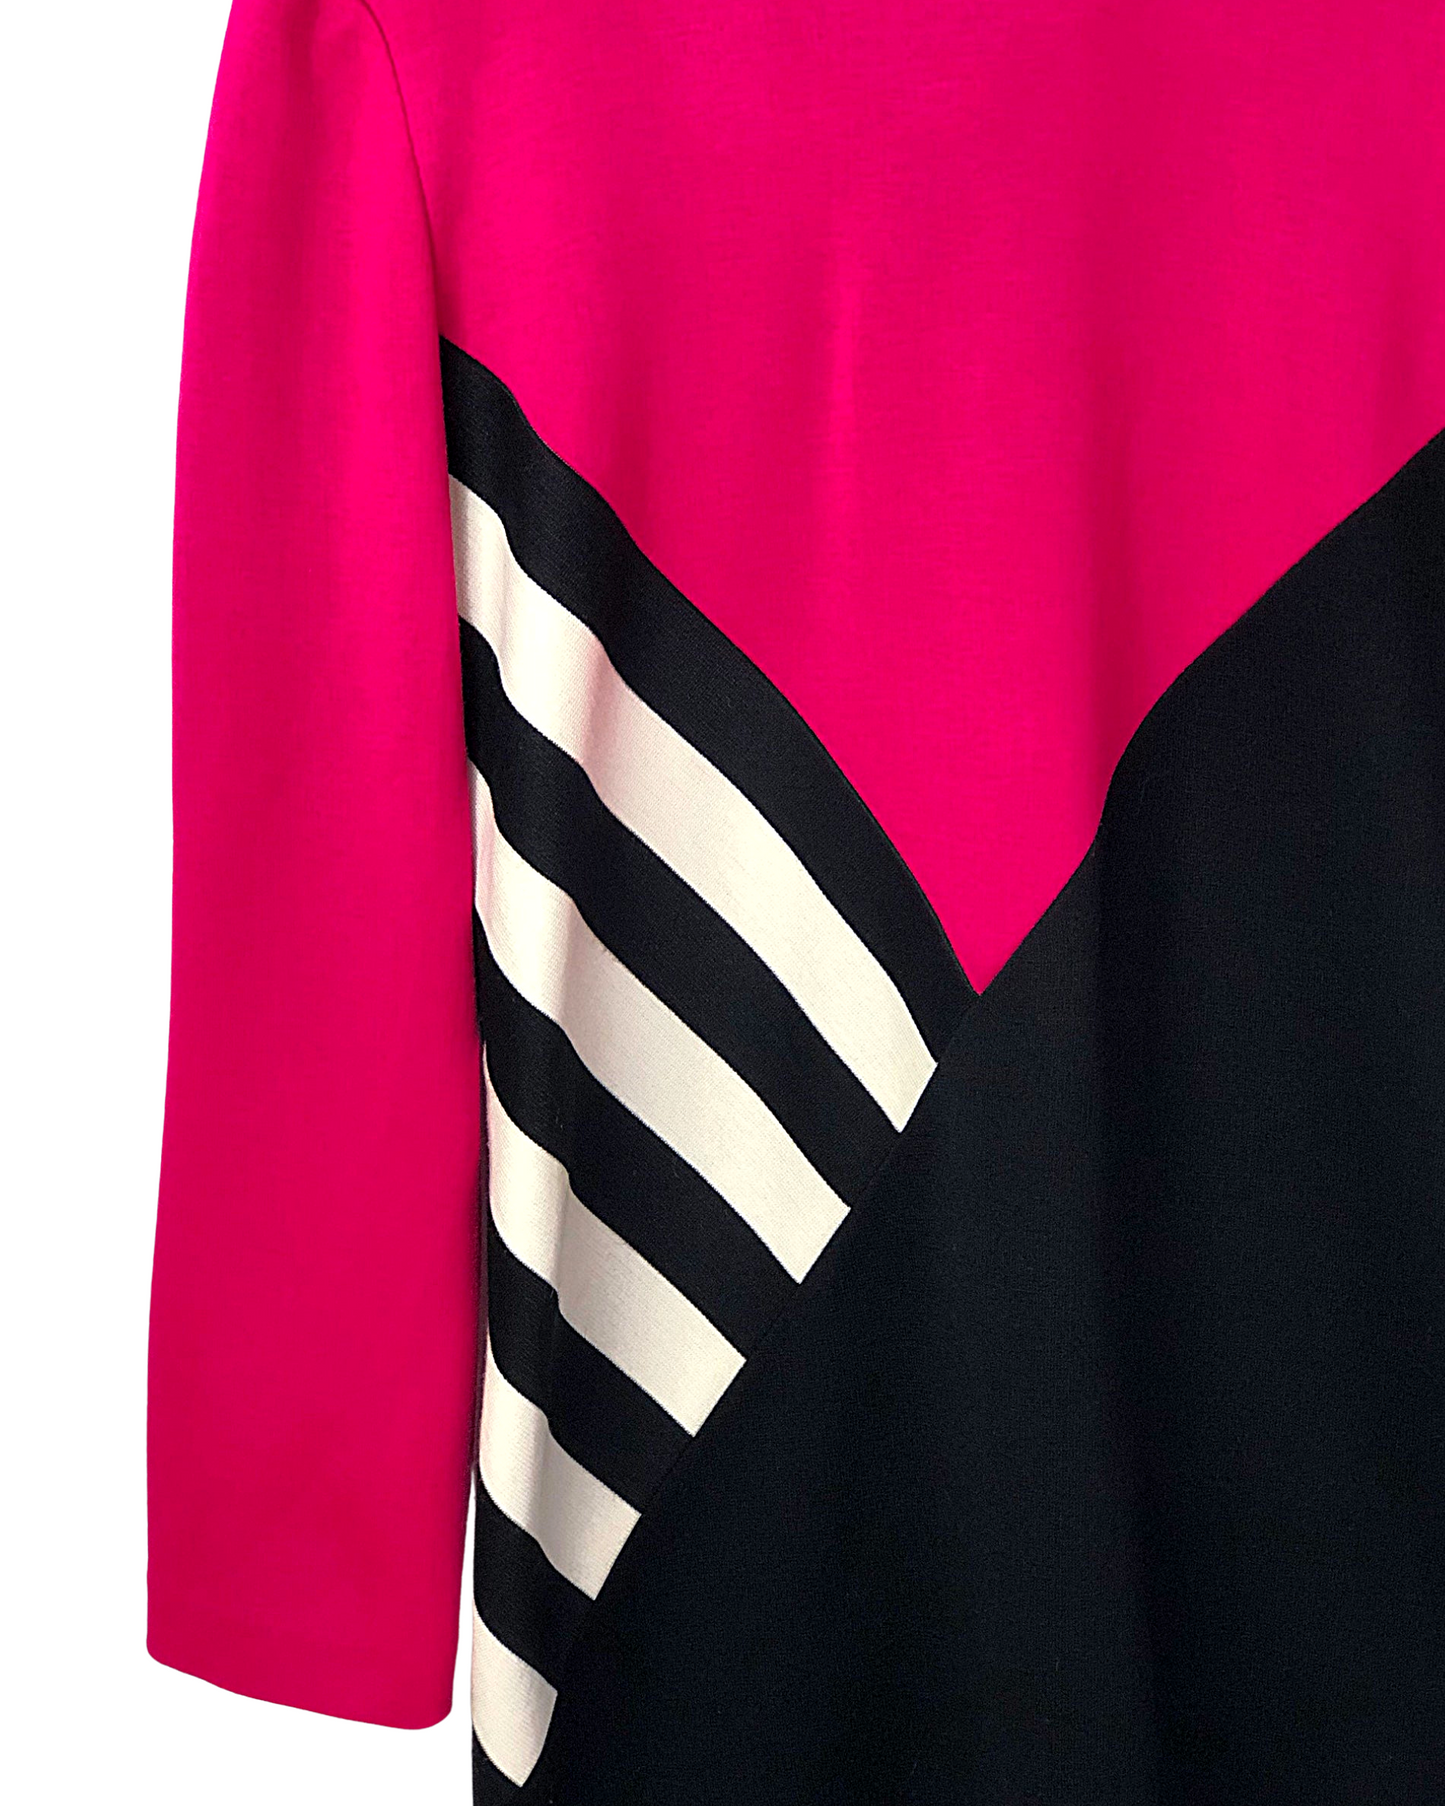 90’s Mod Striped Fuchsia Black & White BODYCON High Neck “The Nanny” Long Sleeve Fitted Evening Dress Size Large